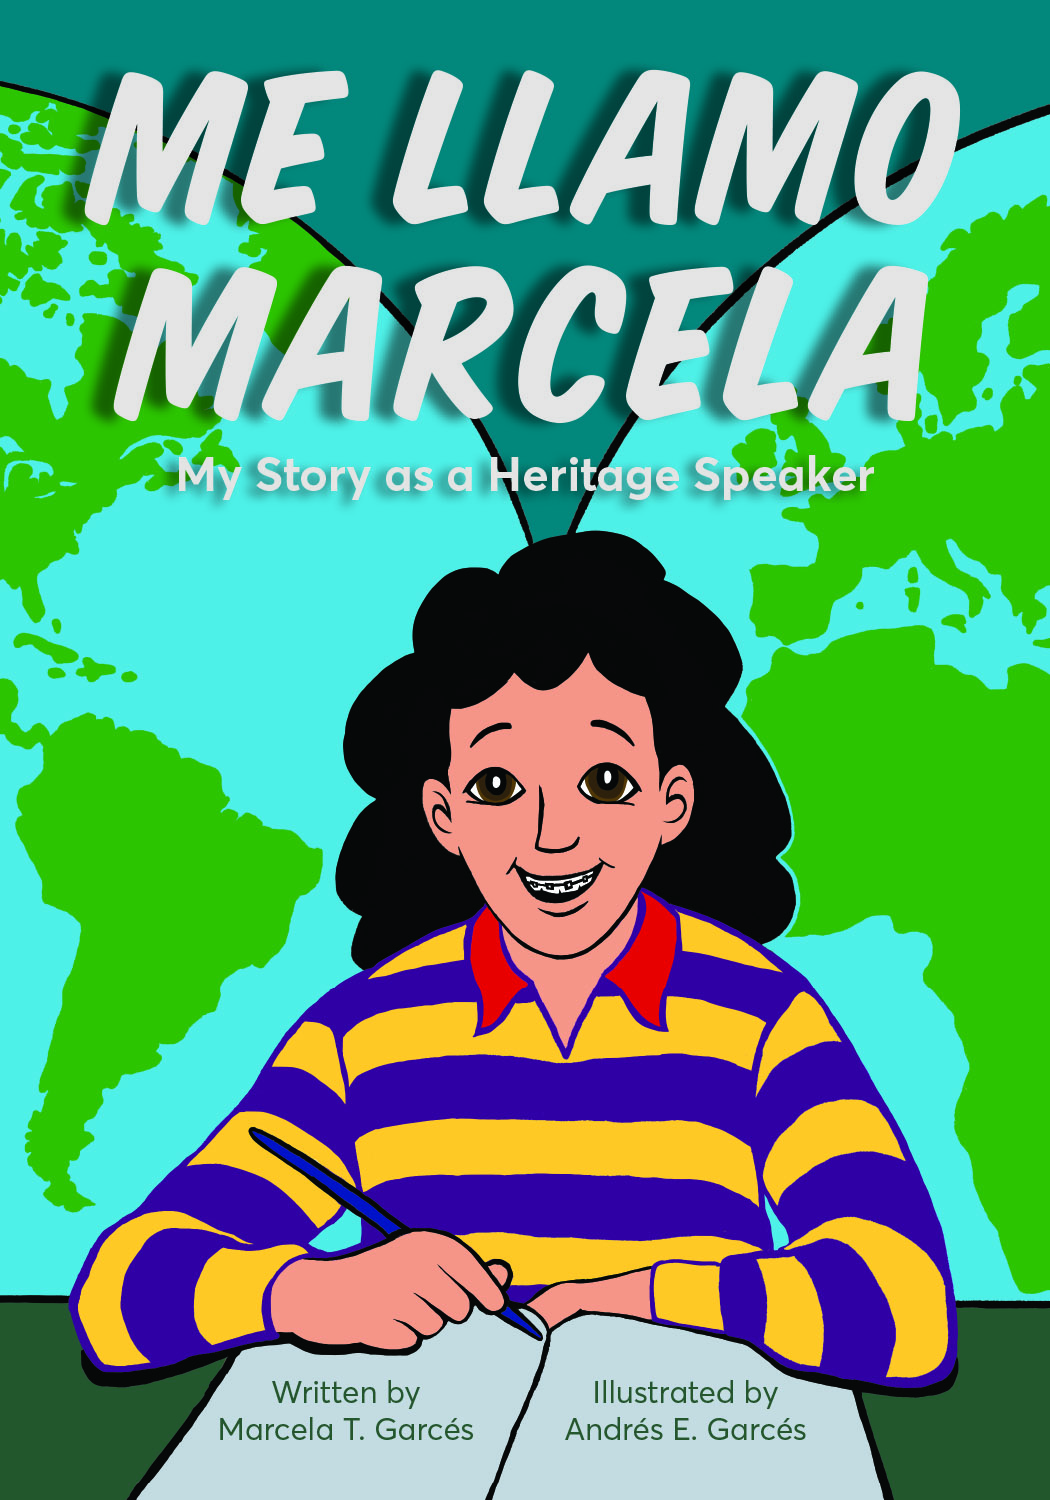 front cover of Me llamo Marcela: My Story as a Heritage Speaker, written by Marcela T. Garcés and illustrated by Andrés E. Garcés, featuring a cartoon drawing of Marcela as a teen-ager with braces, writing in a book with a map of the world behind her.